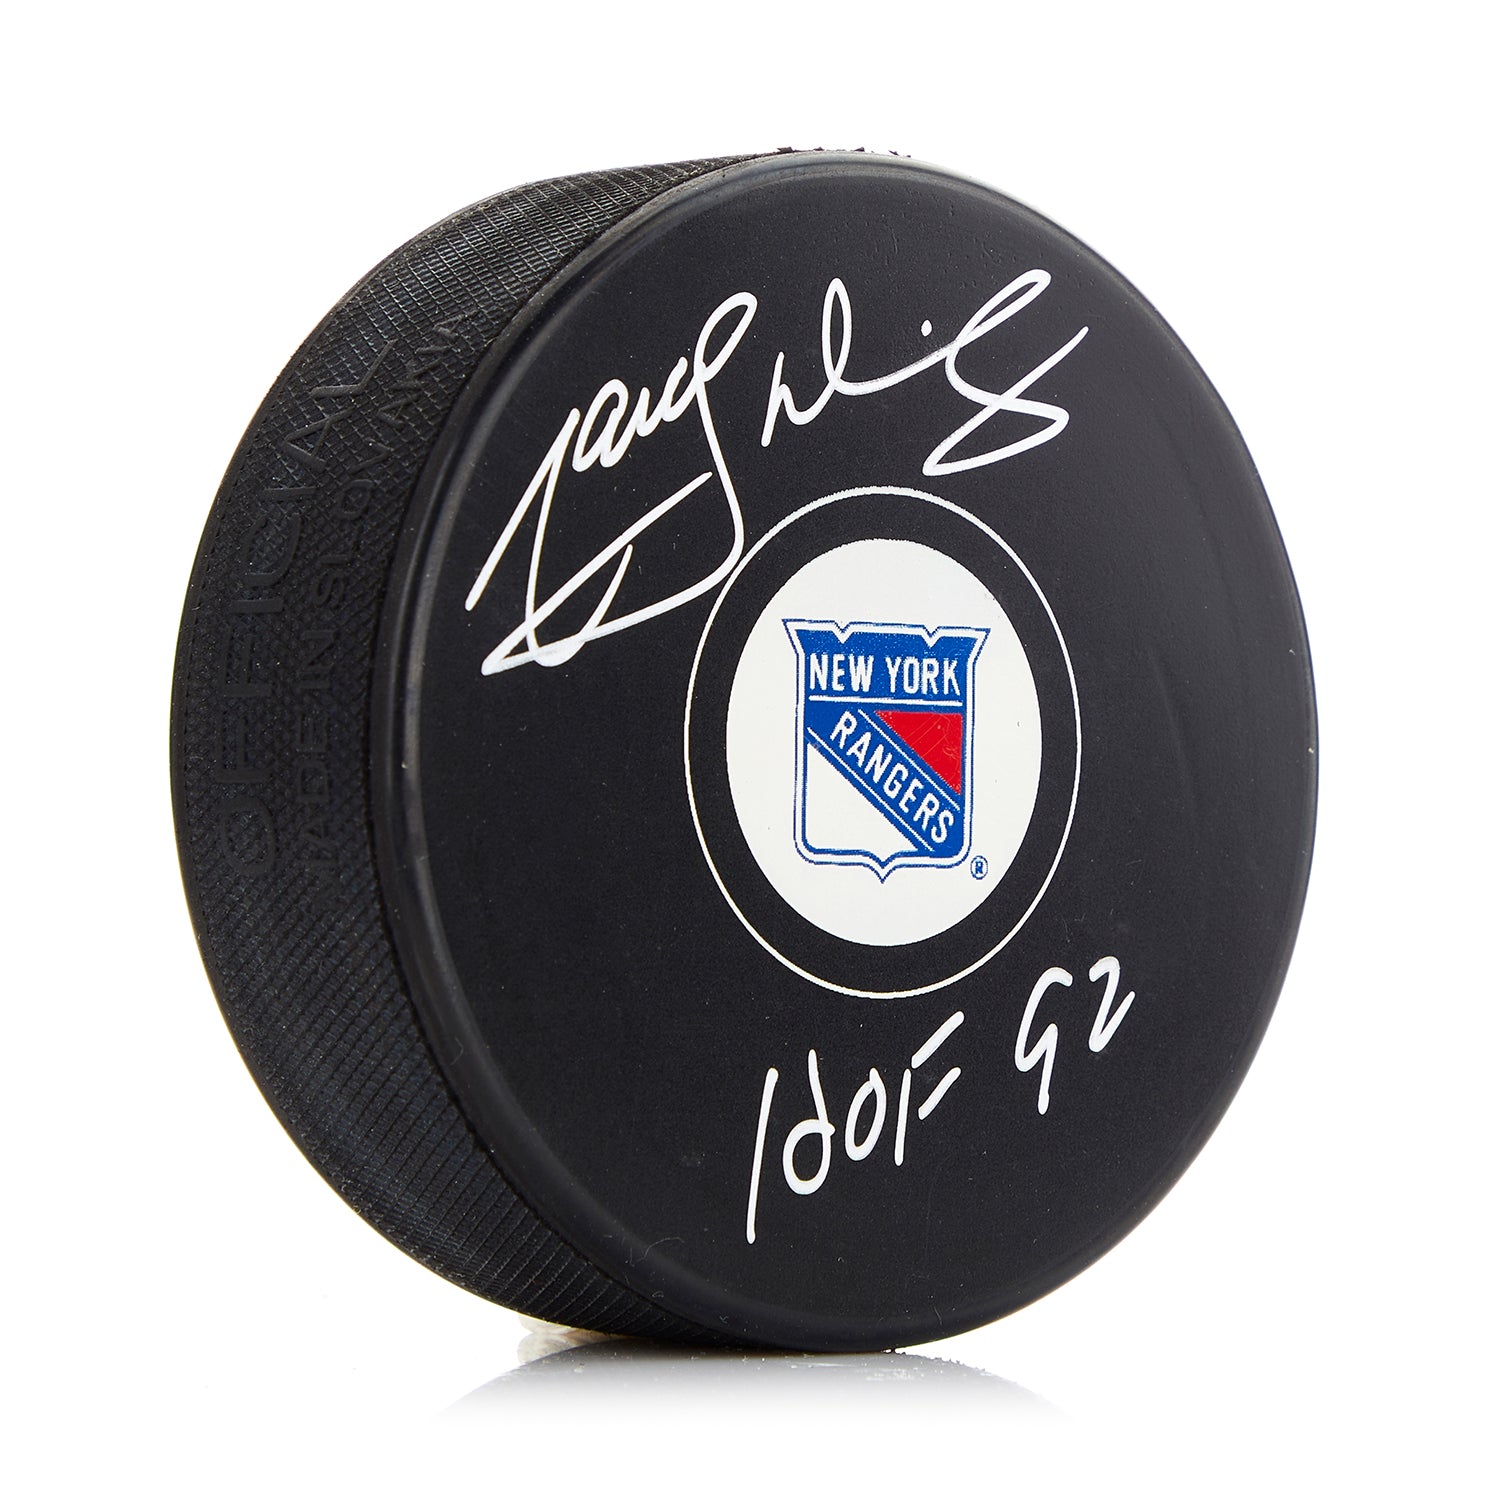 Marcel Dionne Signed New York Rangers Hockey Puck with HOF Note